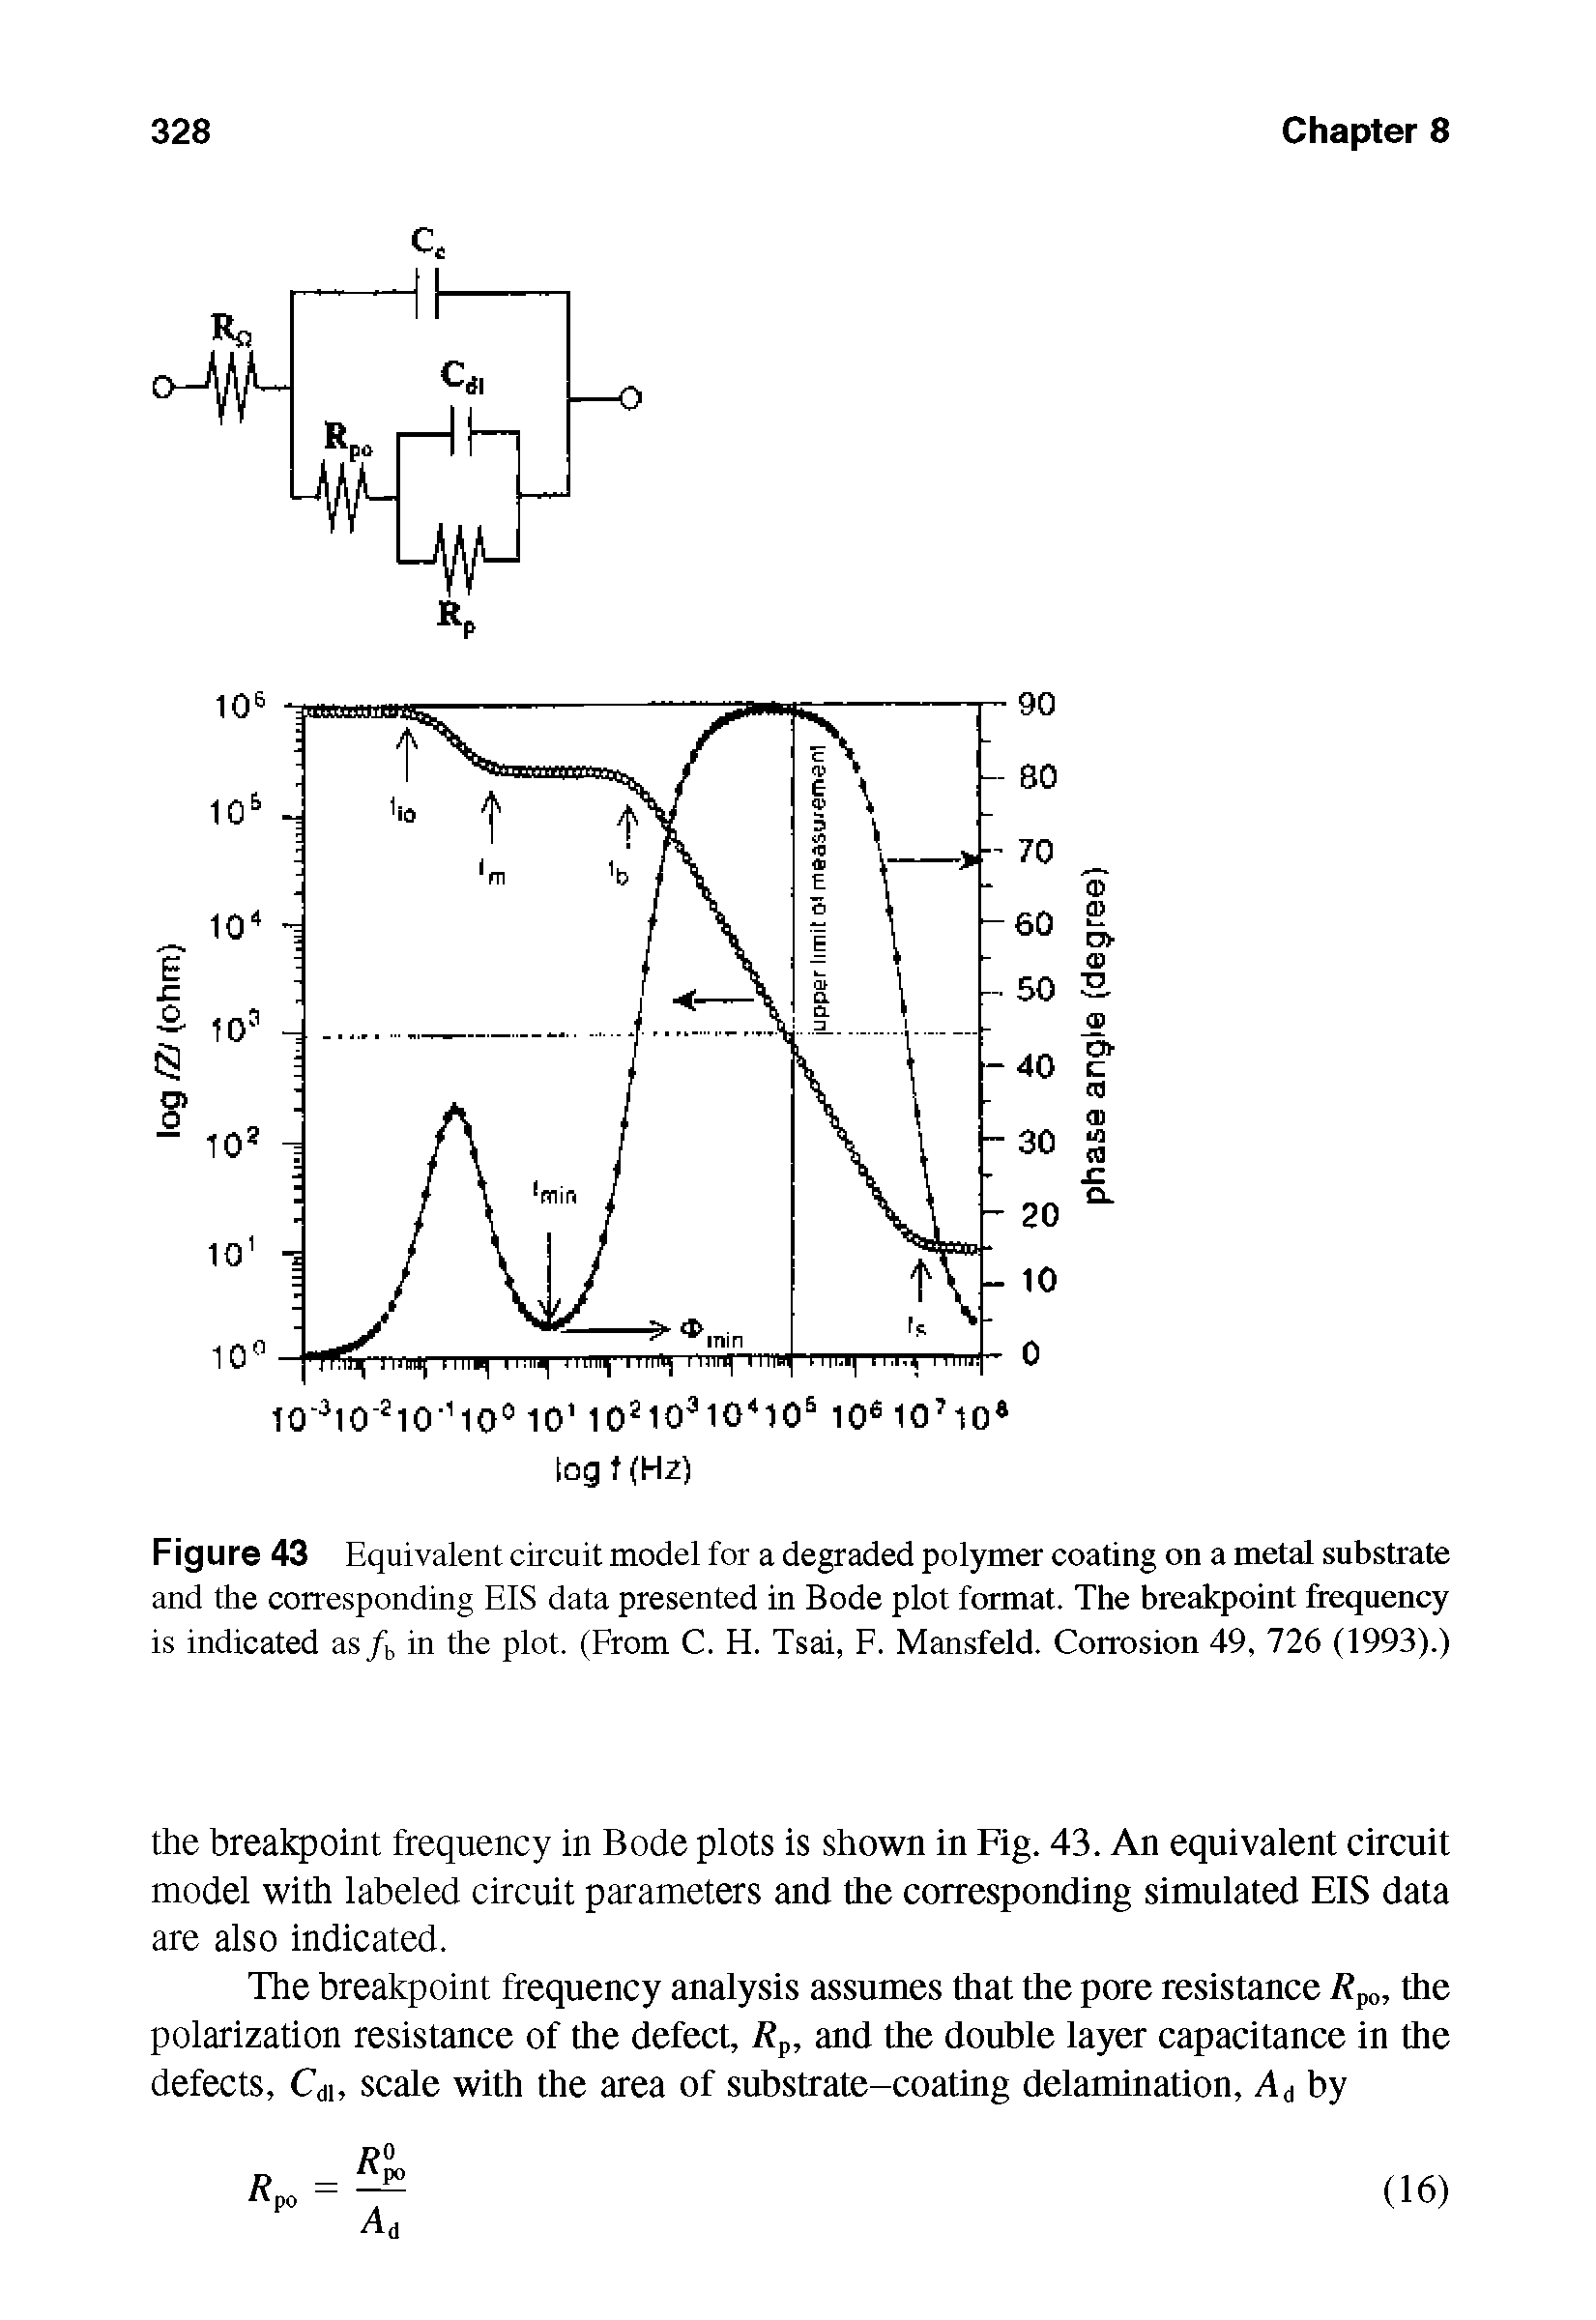 Figure 43 Equivalent circuit model for a degraded polymer coating on a metal substrate and the corresponding EIS data presented in Bode plot format. The breakpoint frequency is indicated as/b in the plot. (From C. H. Tsai, F. Mansfeld. Corrosion 49, 726 (1993).)...